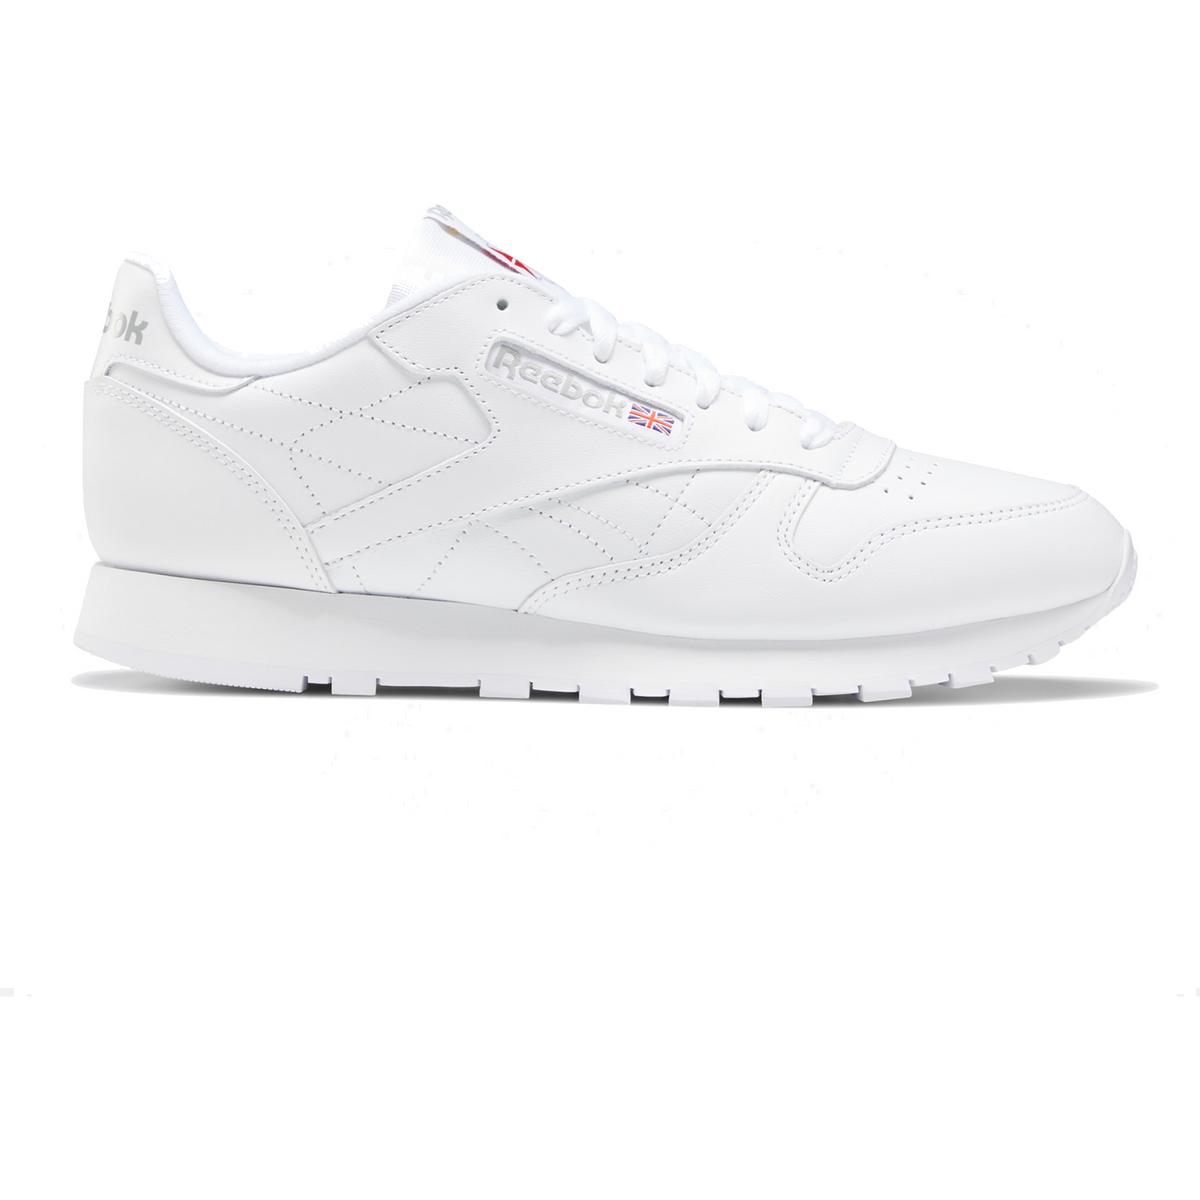 Reebok Men's Classic Leather White / Grey Just For Sports